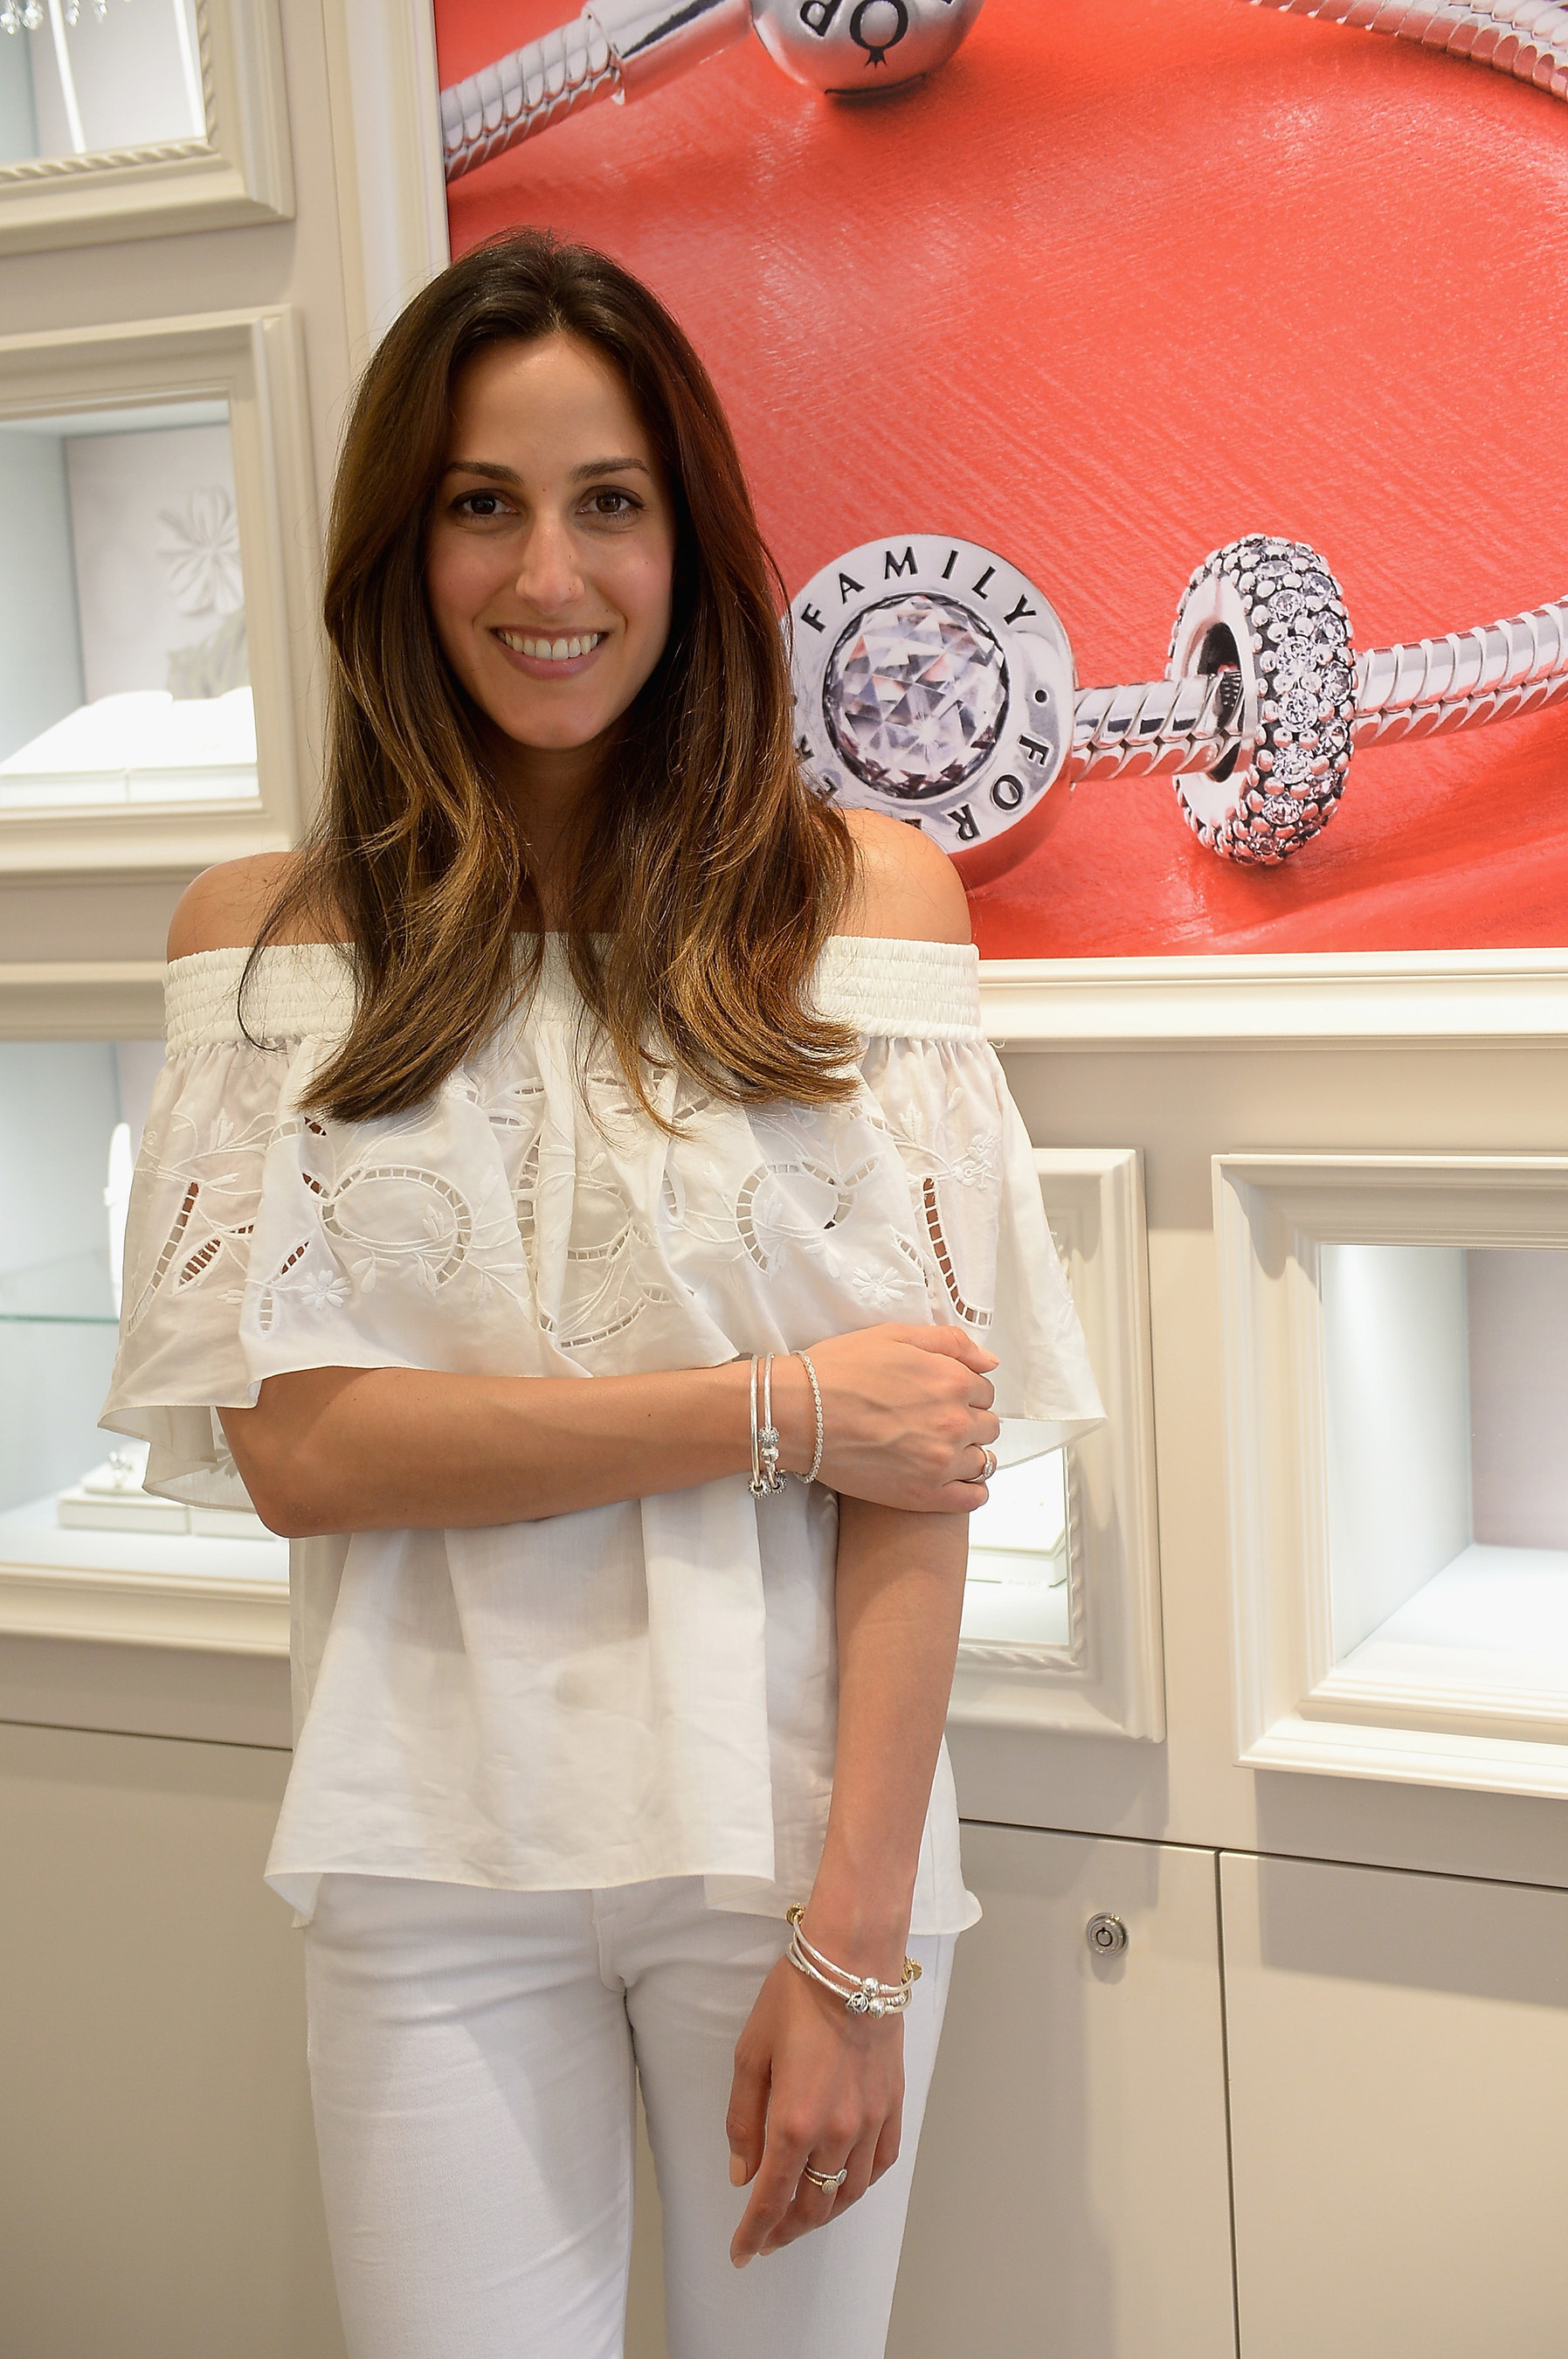 ShopBAZAAR Editor, Alana Quagliariello shared her top picks from PANDORA Jewelry's latest Spring Collection at the grand opening celebration